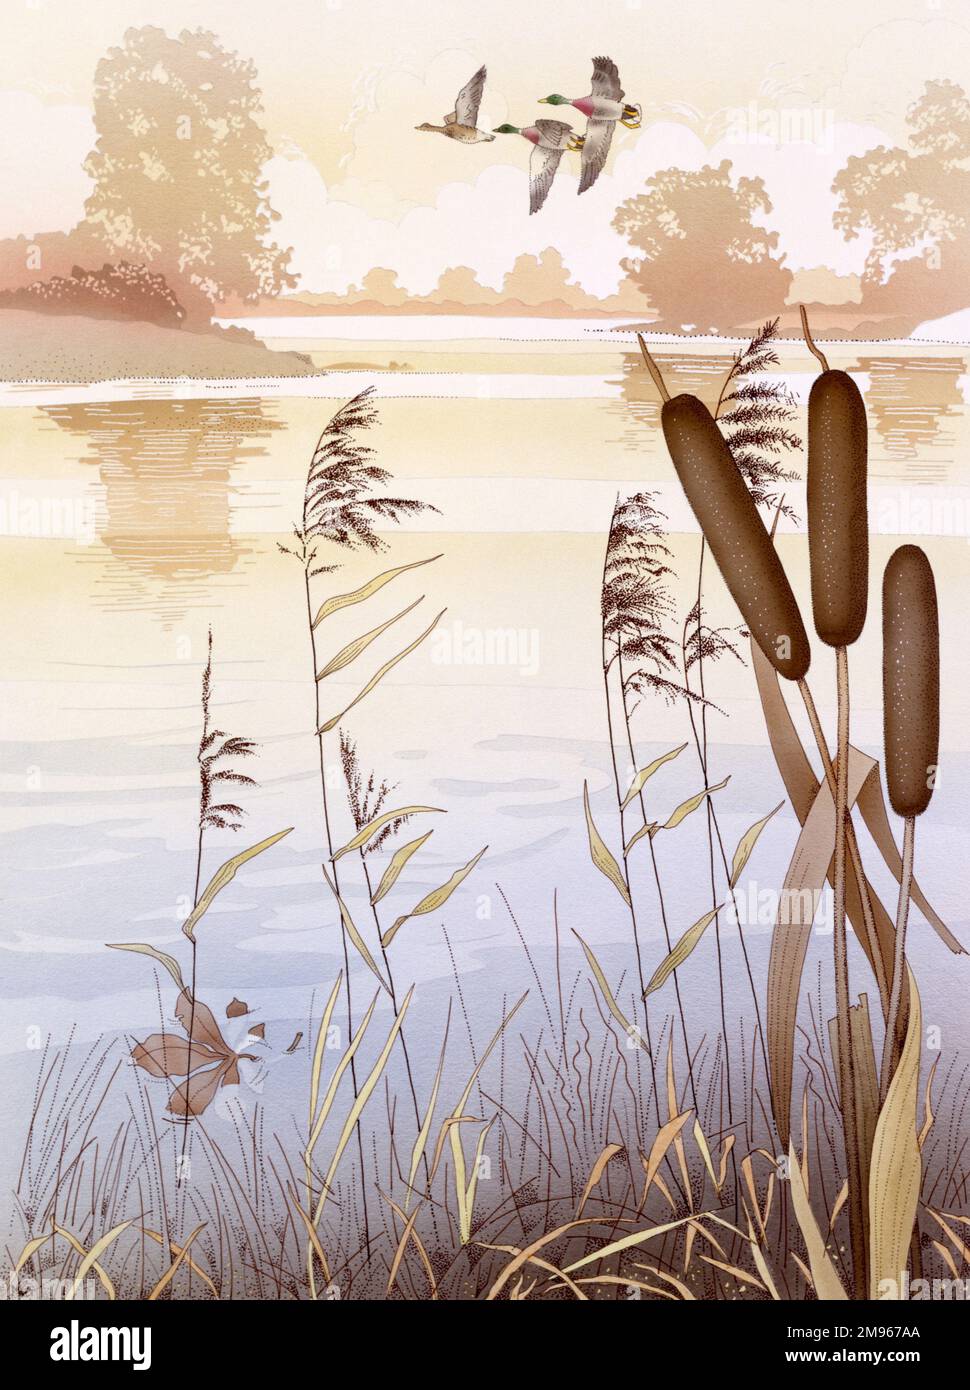 A pretty country scene with a stretch of water, bulrushes growing in the foreground, and three flying ducks. Stock Photo